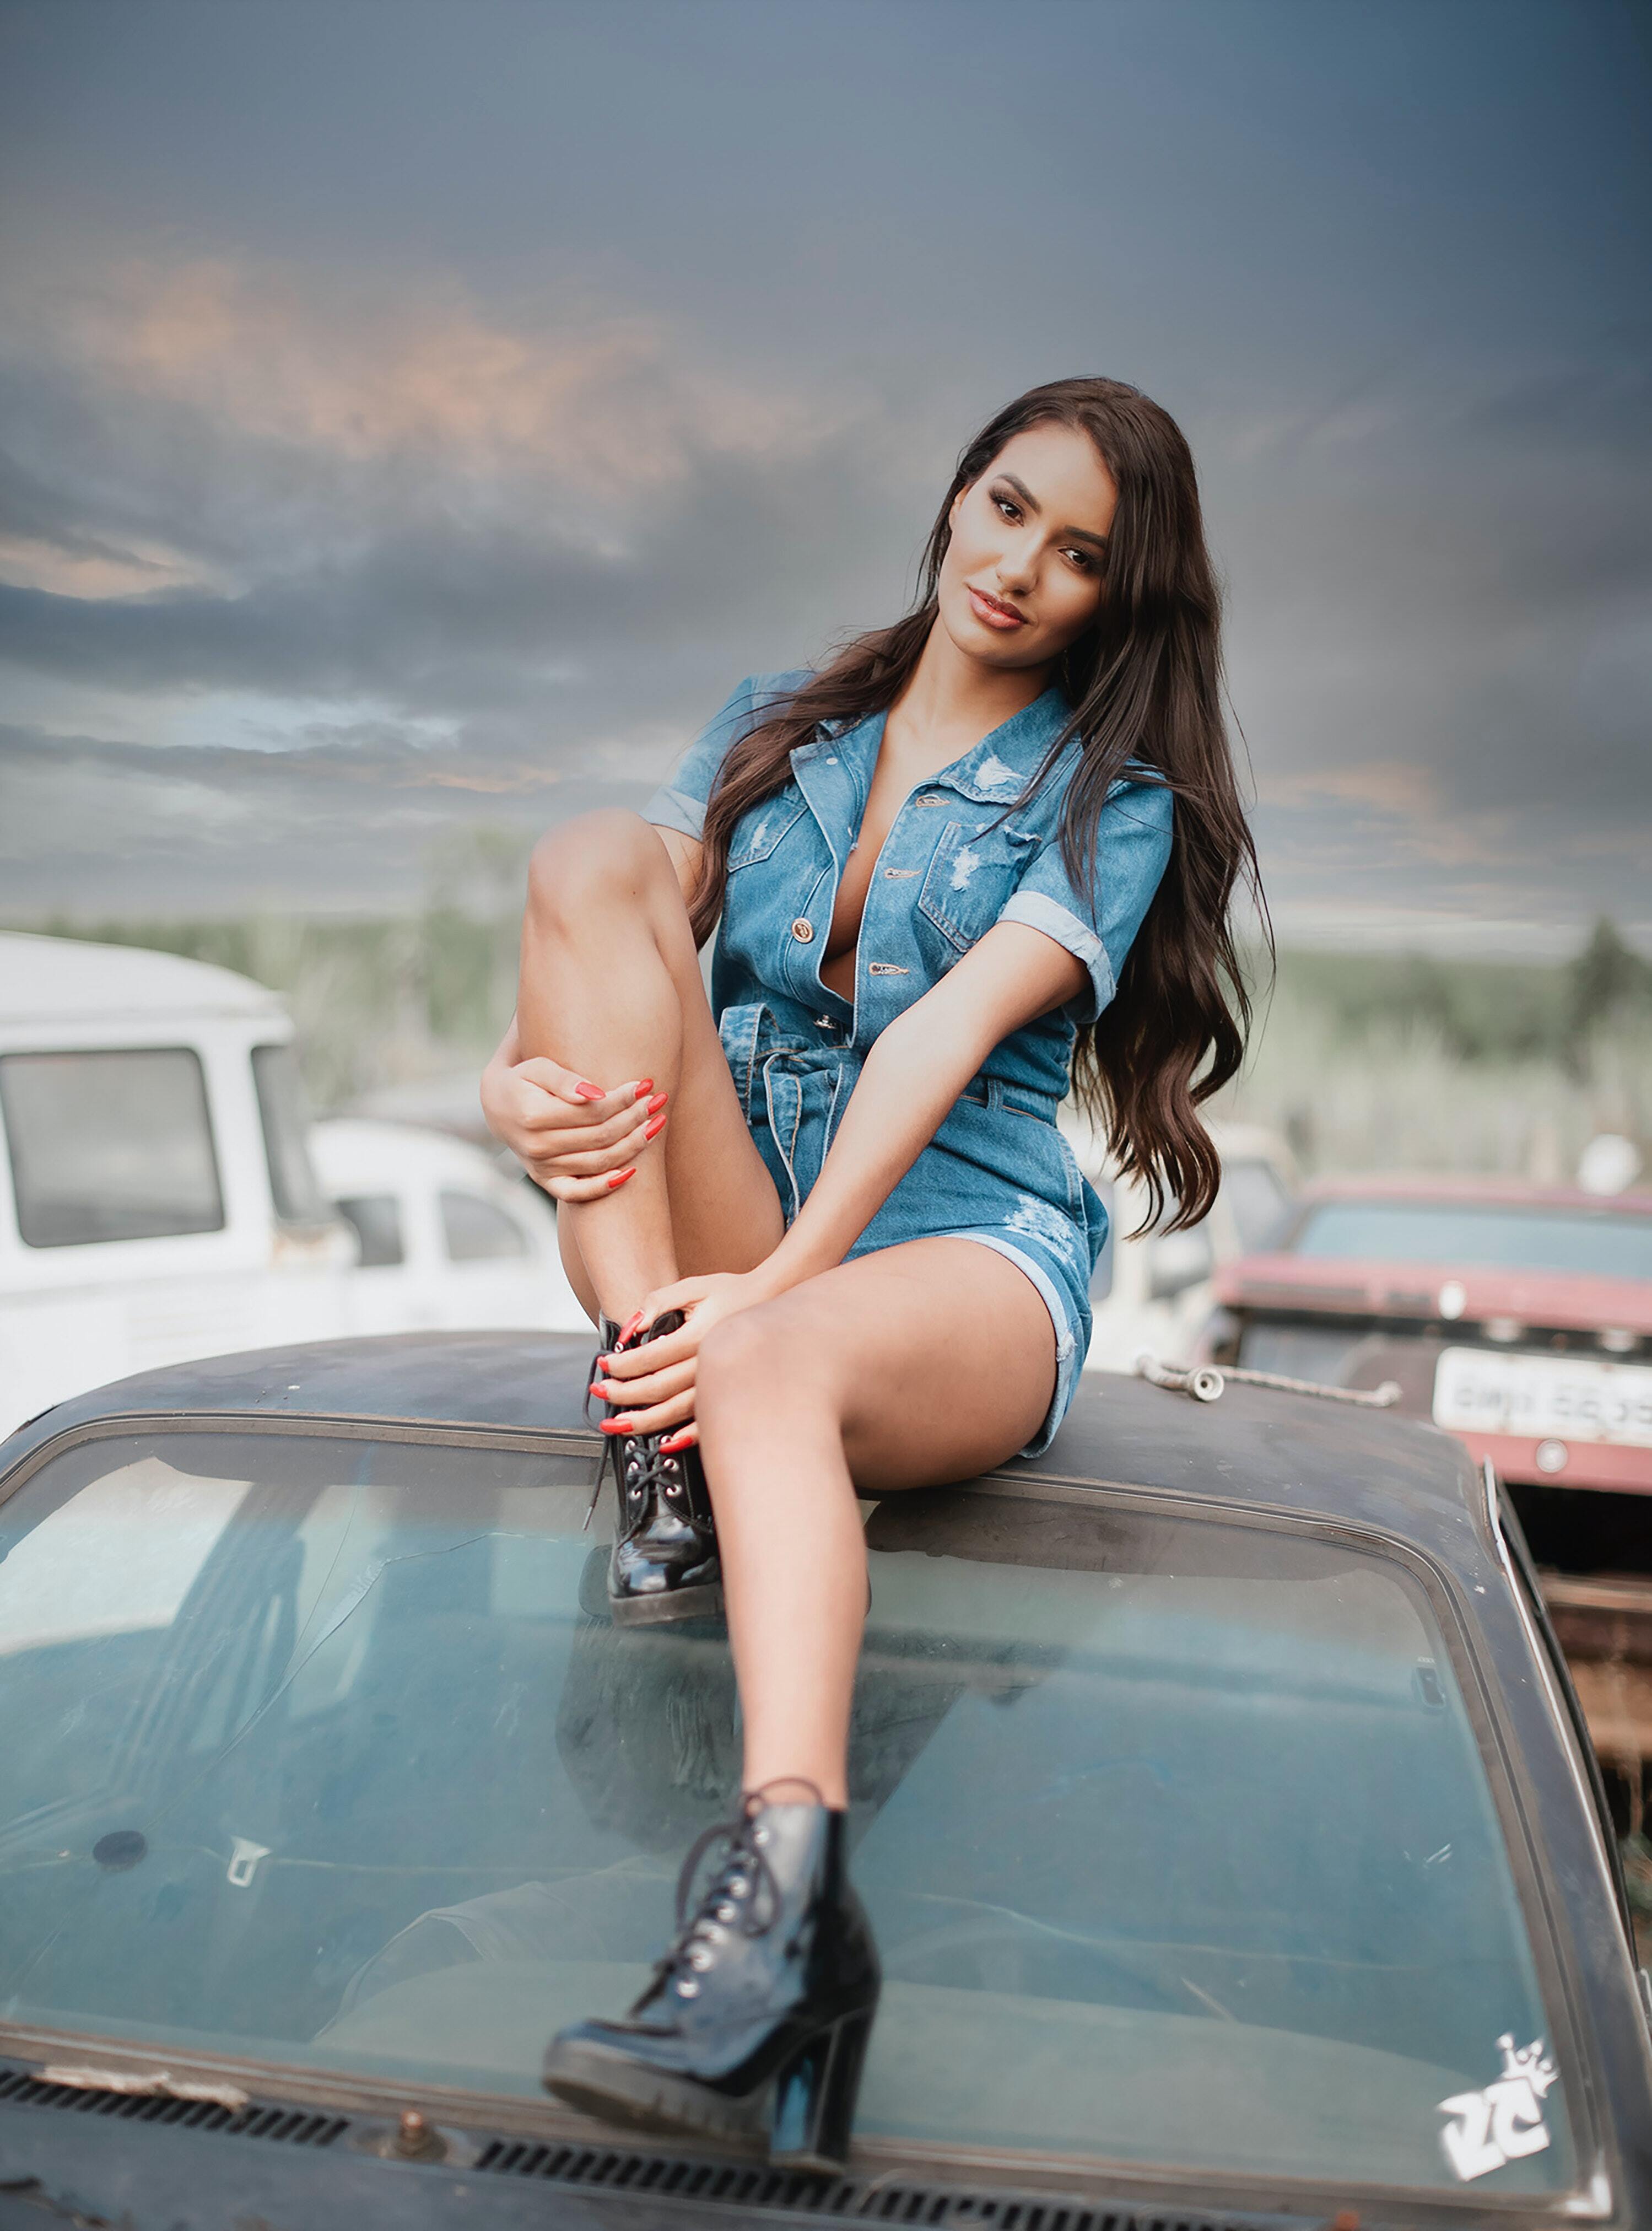 Image: Brunette, smile, legs, boots, hair, sitting, car, roof, sky, weather